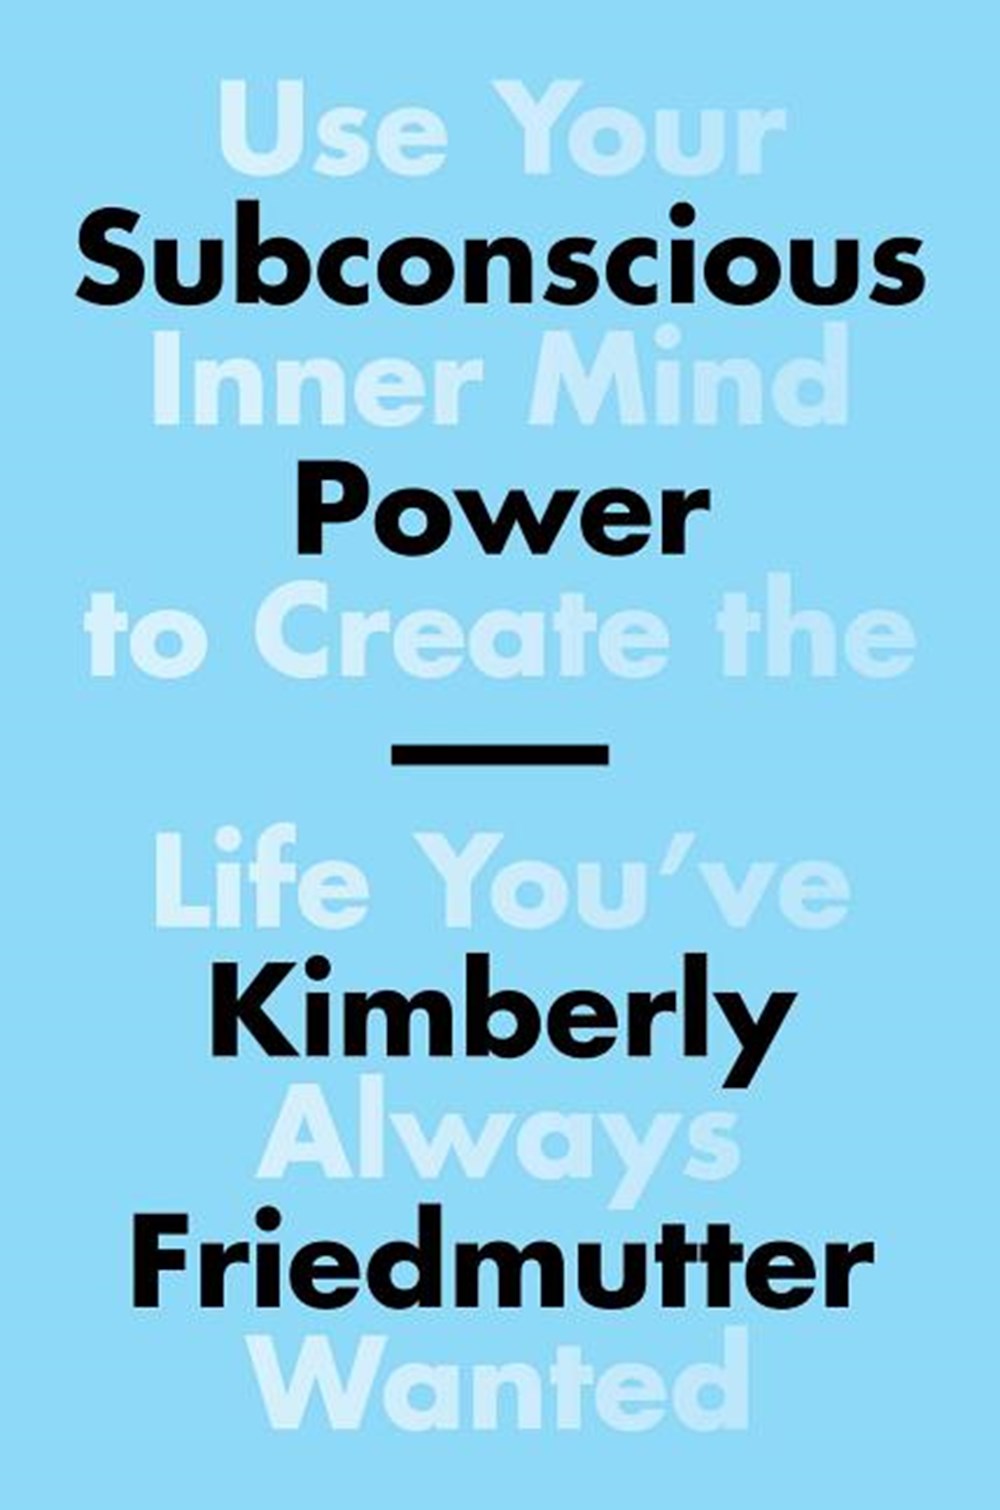 Subconscious Power Use Your Inner Mind to Create the Life You've Always Wanted